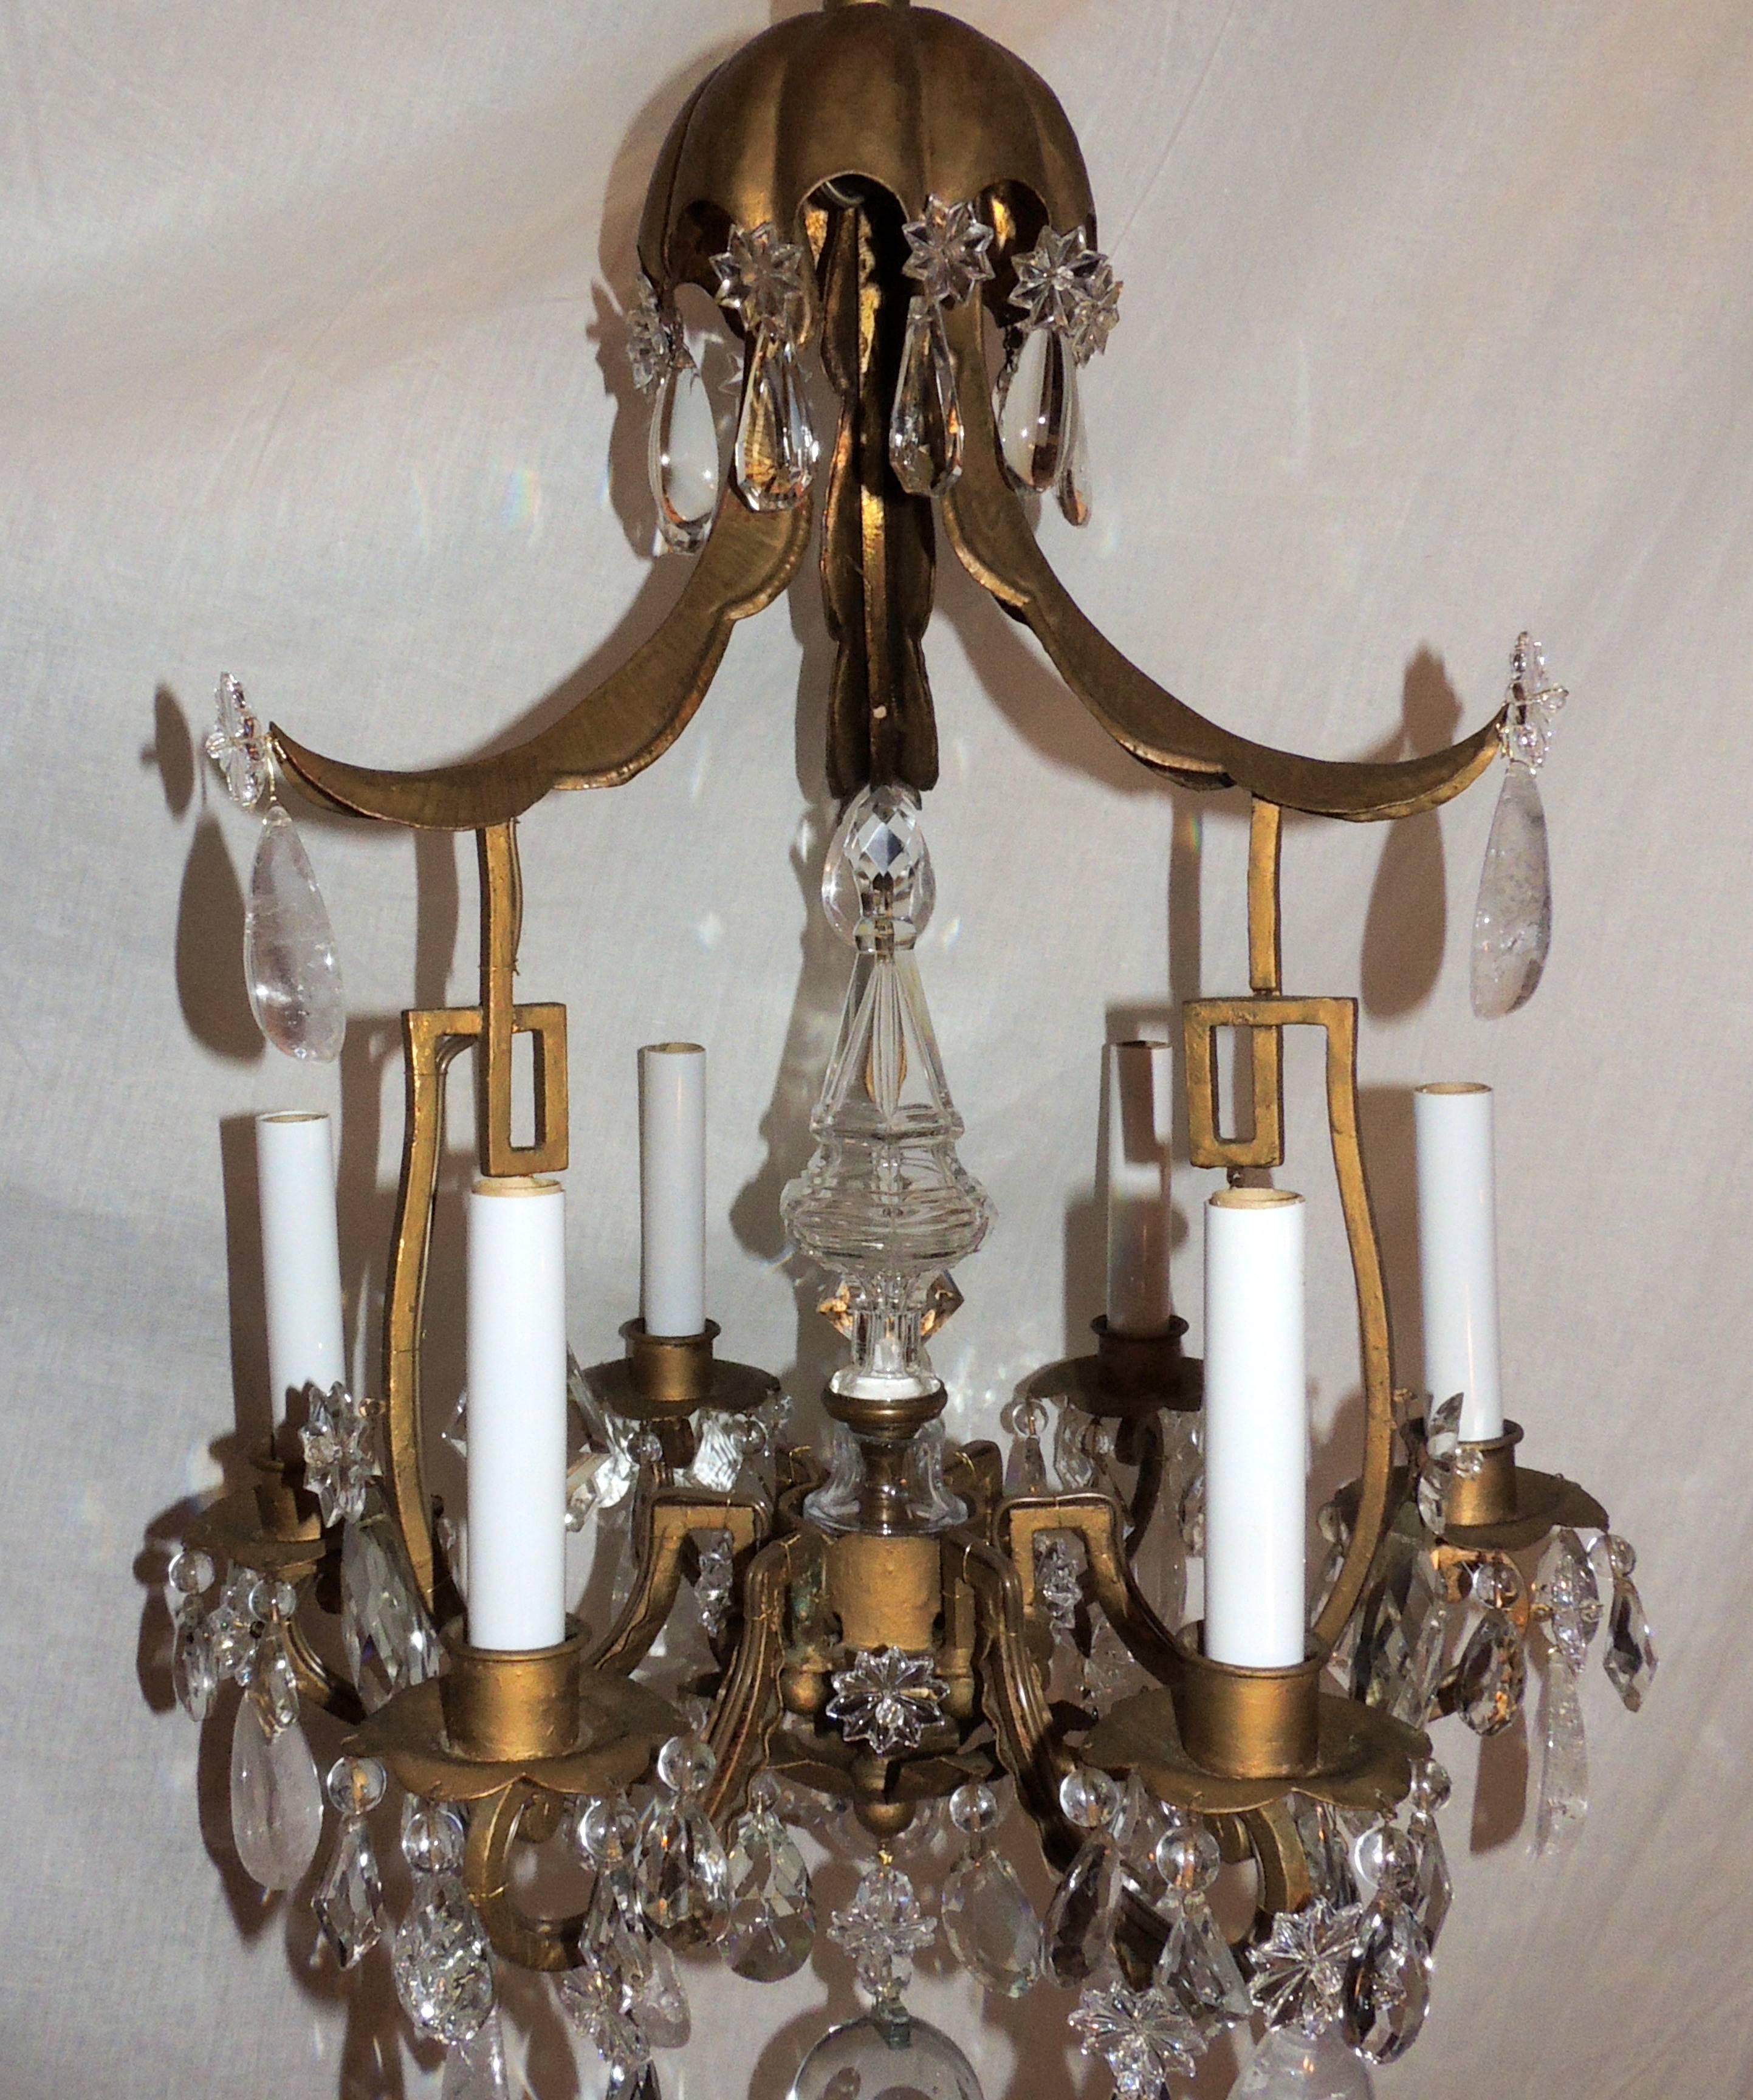 Mid-20th Century Wonderful French Pagoda Gilt Rock Crystal Bagues Chandelier Six-Light Fixture For Sale